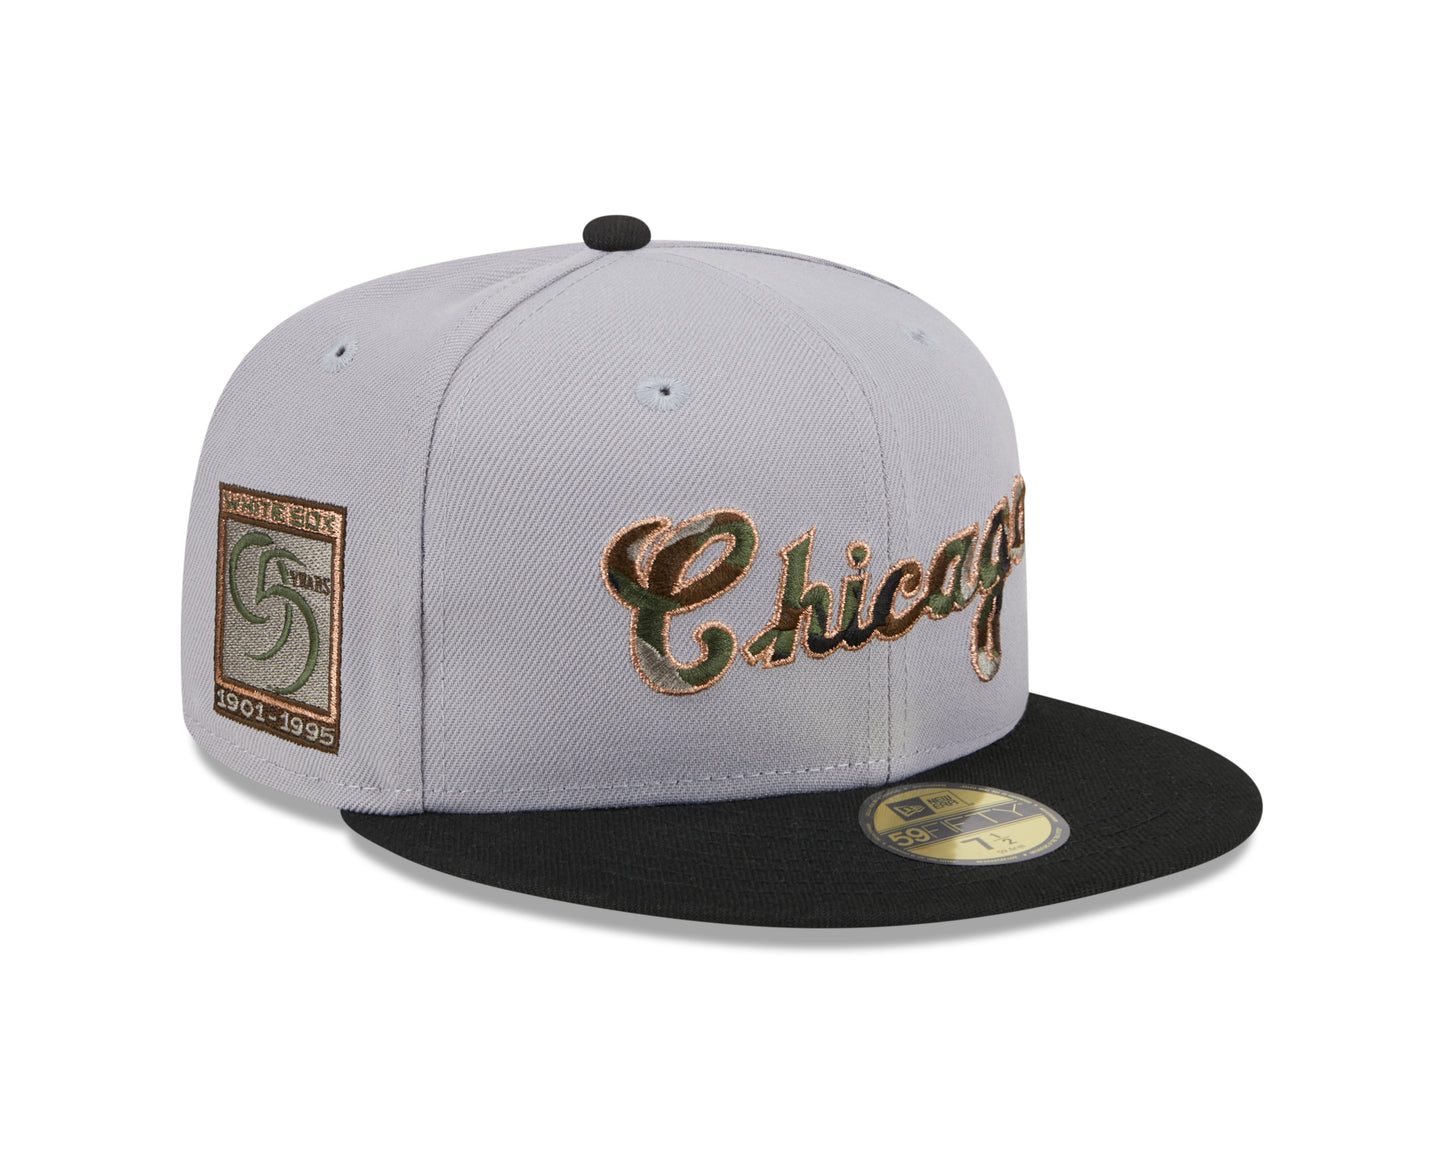 New Era - CAMO FILL - 59fifty Fitted Cap - Chicago White Sox - Grey - Headz Up 